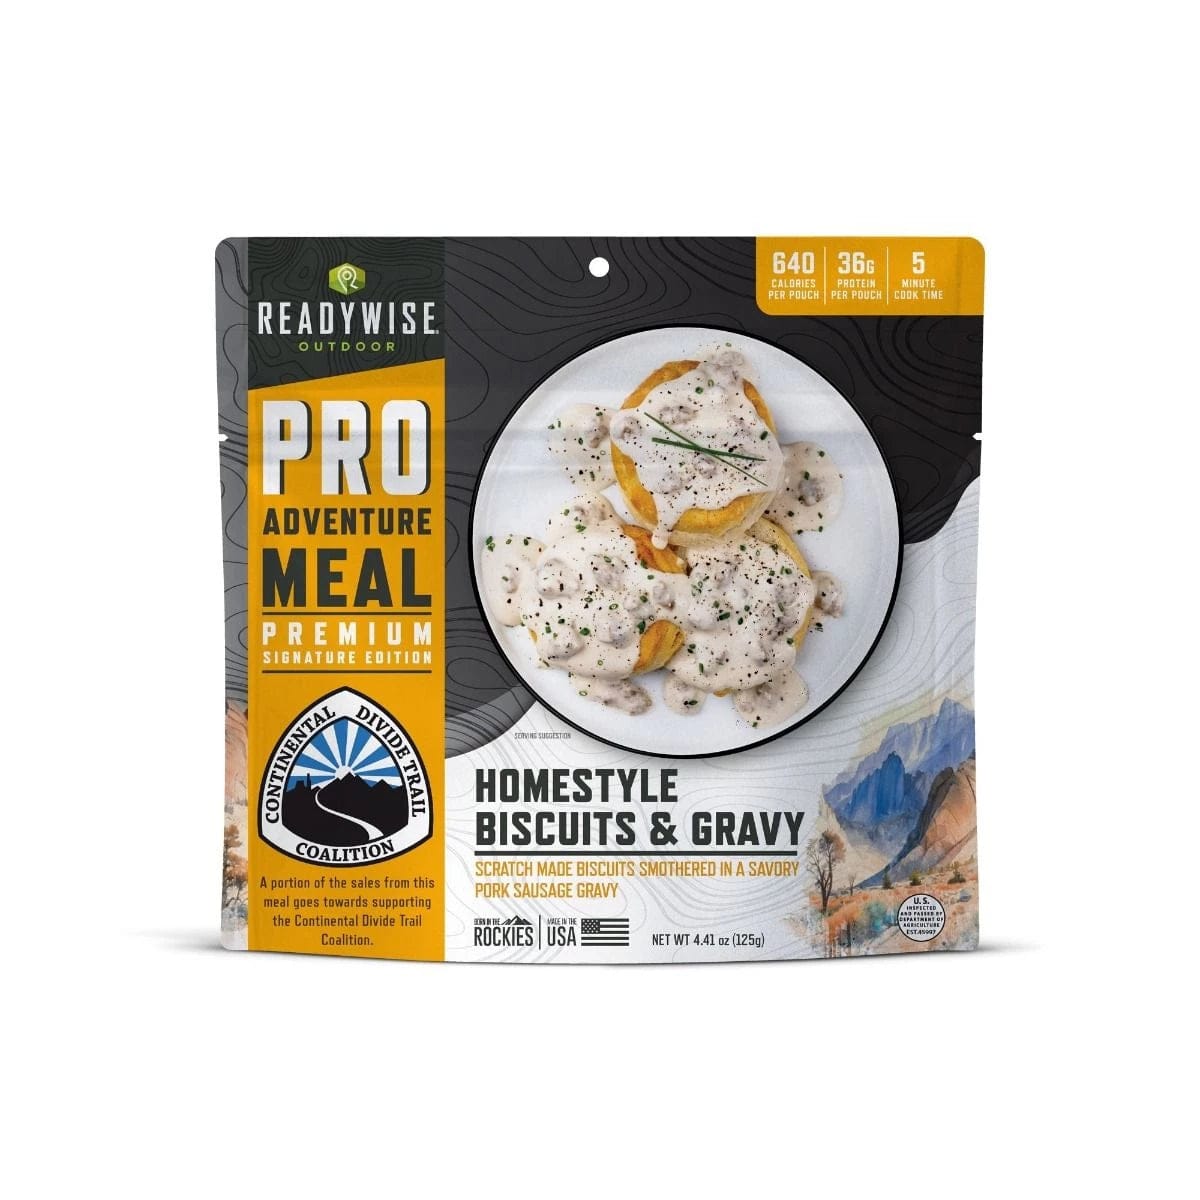 ReadyWise Pro Homestyle Biscuits & Gravy with Sausage Meal: Hearty 6-Pack for Outdoor Breakfast & Brunch